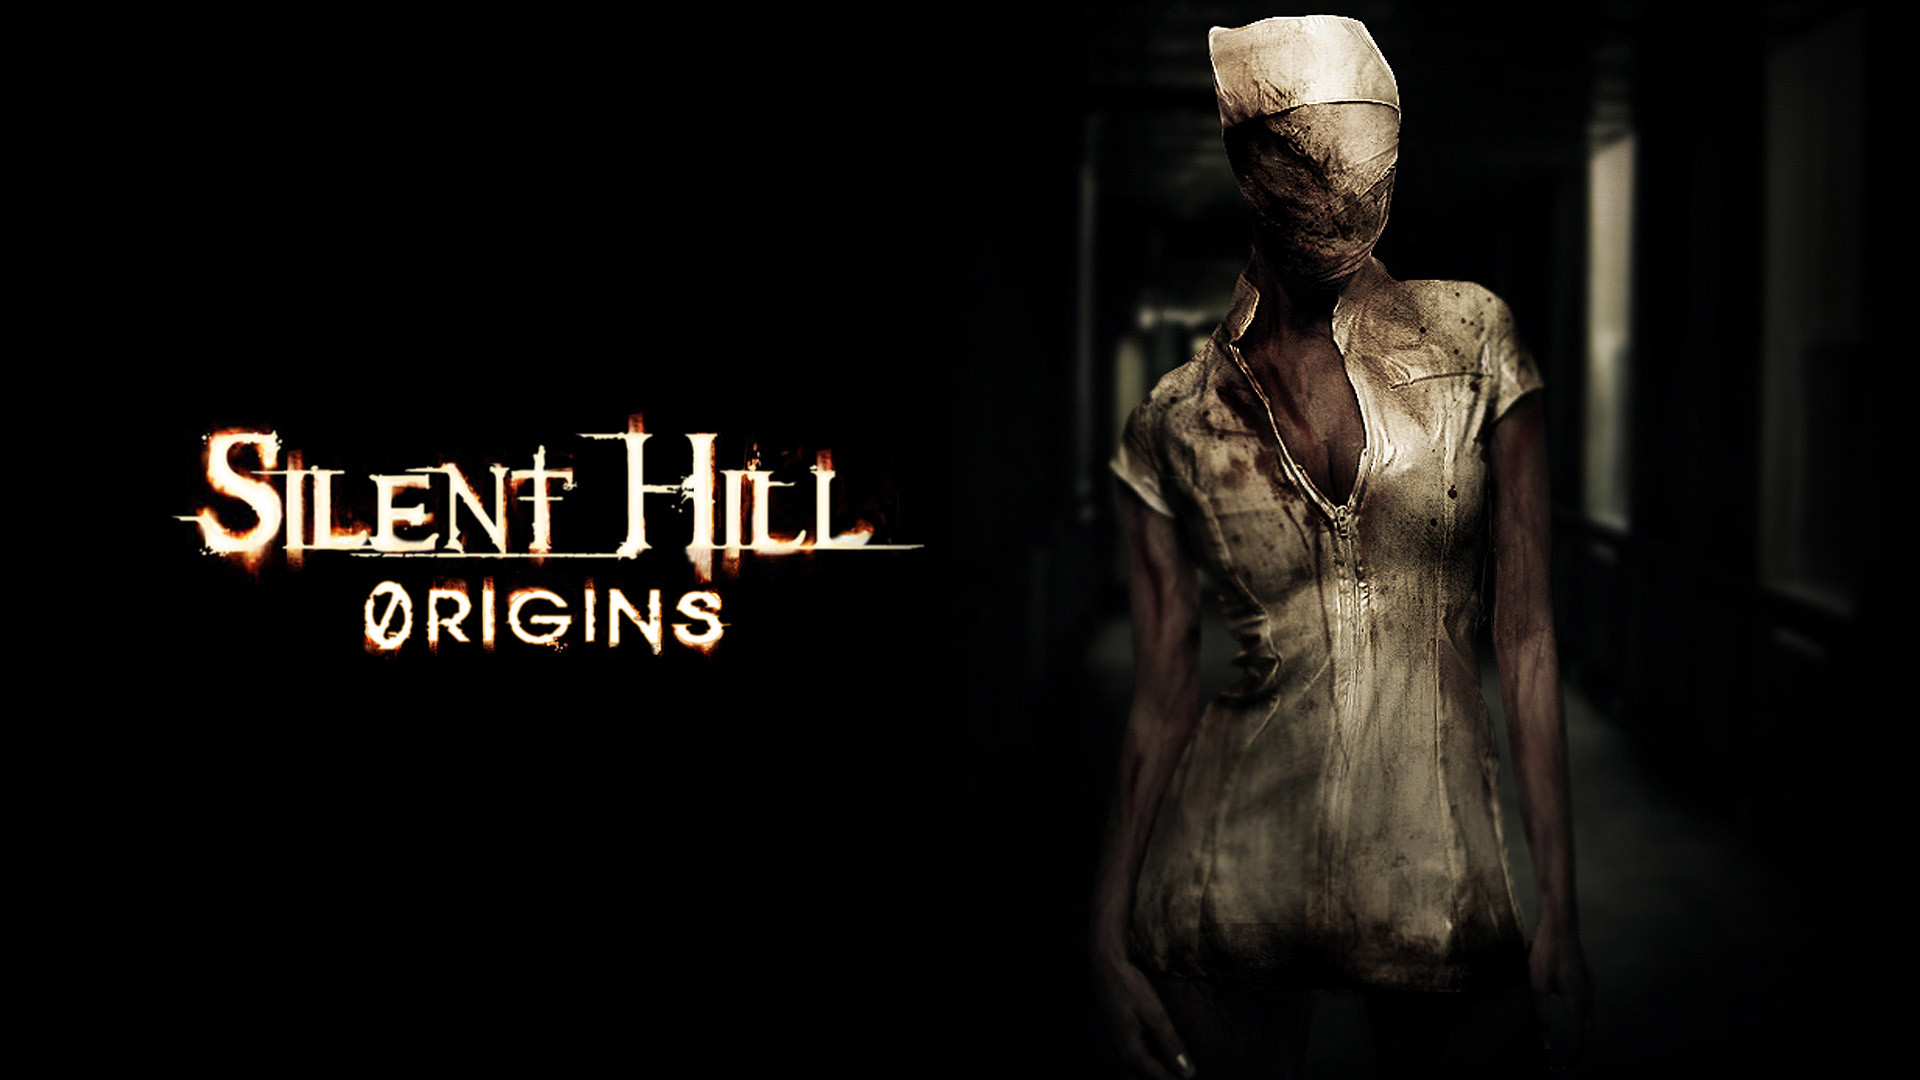 1920x1080 Silent Hill images Origins HD wallpaper and background photos